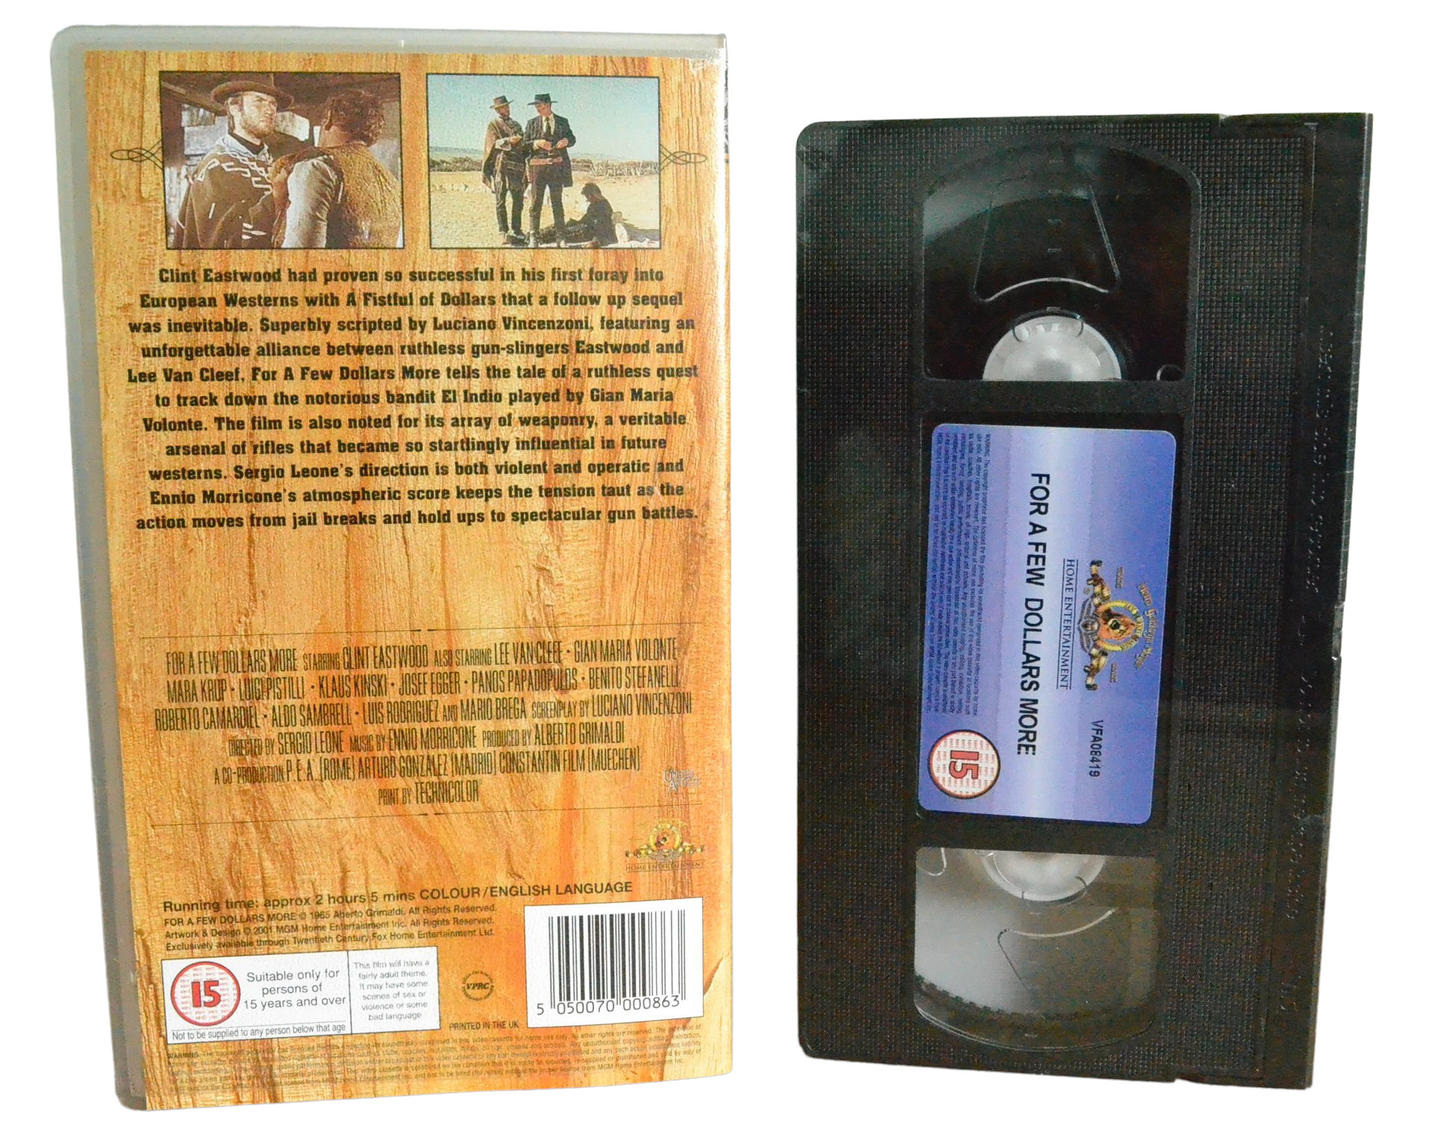 Clint Eastwood For a Few Dollars More - Clint Eastwood - Home Entertainment - 16170S - Brand New Sealed - Pal - VHS-